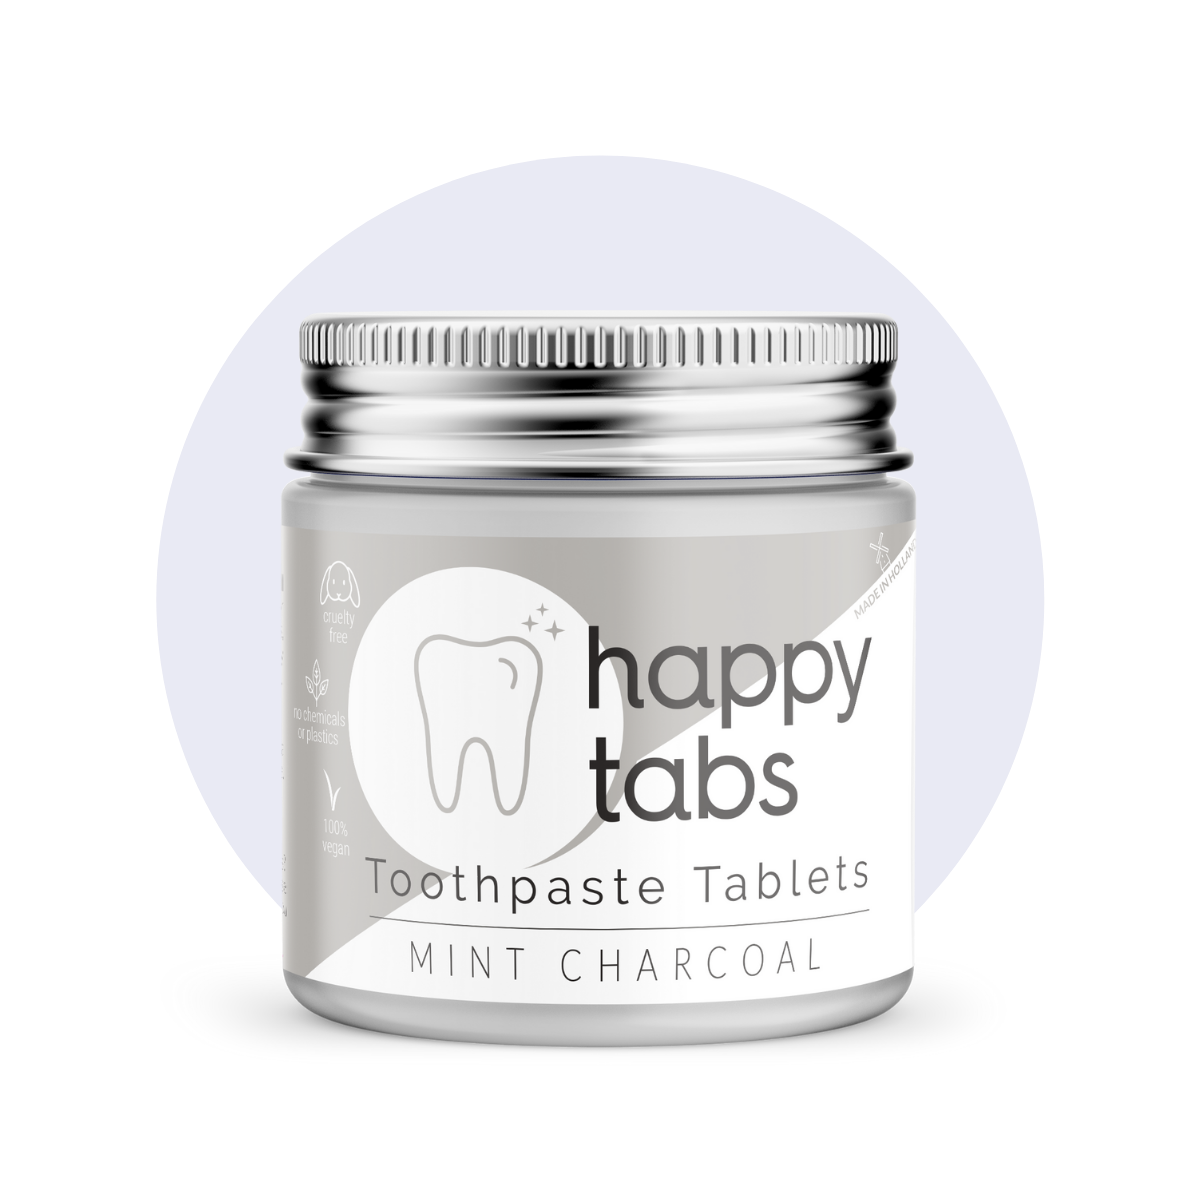 Mint Charcoal without fluoride + storage jar - Happy Tabs